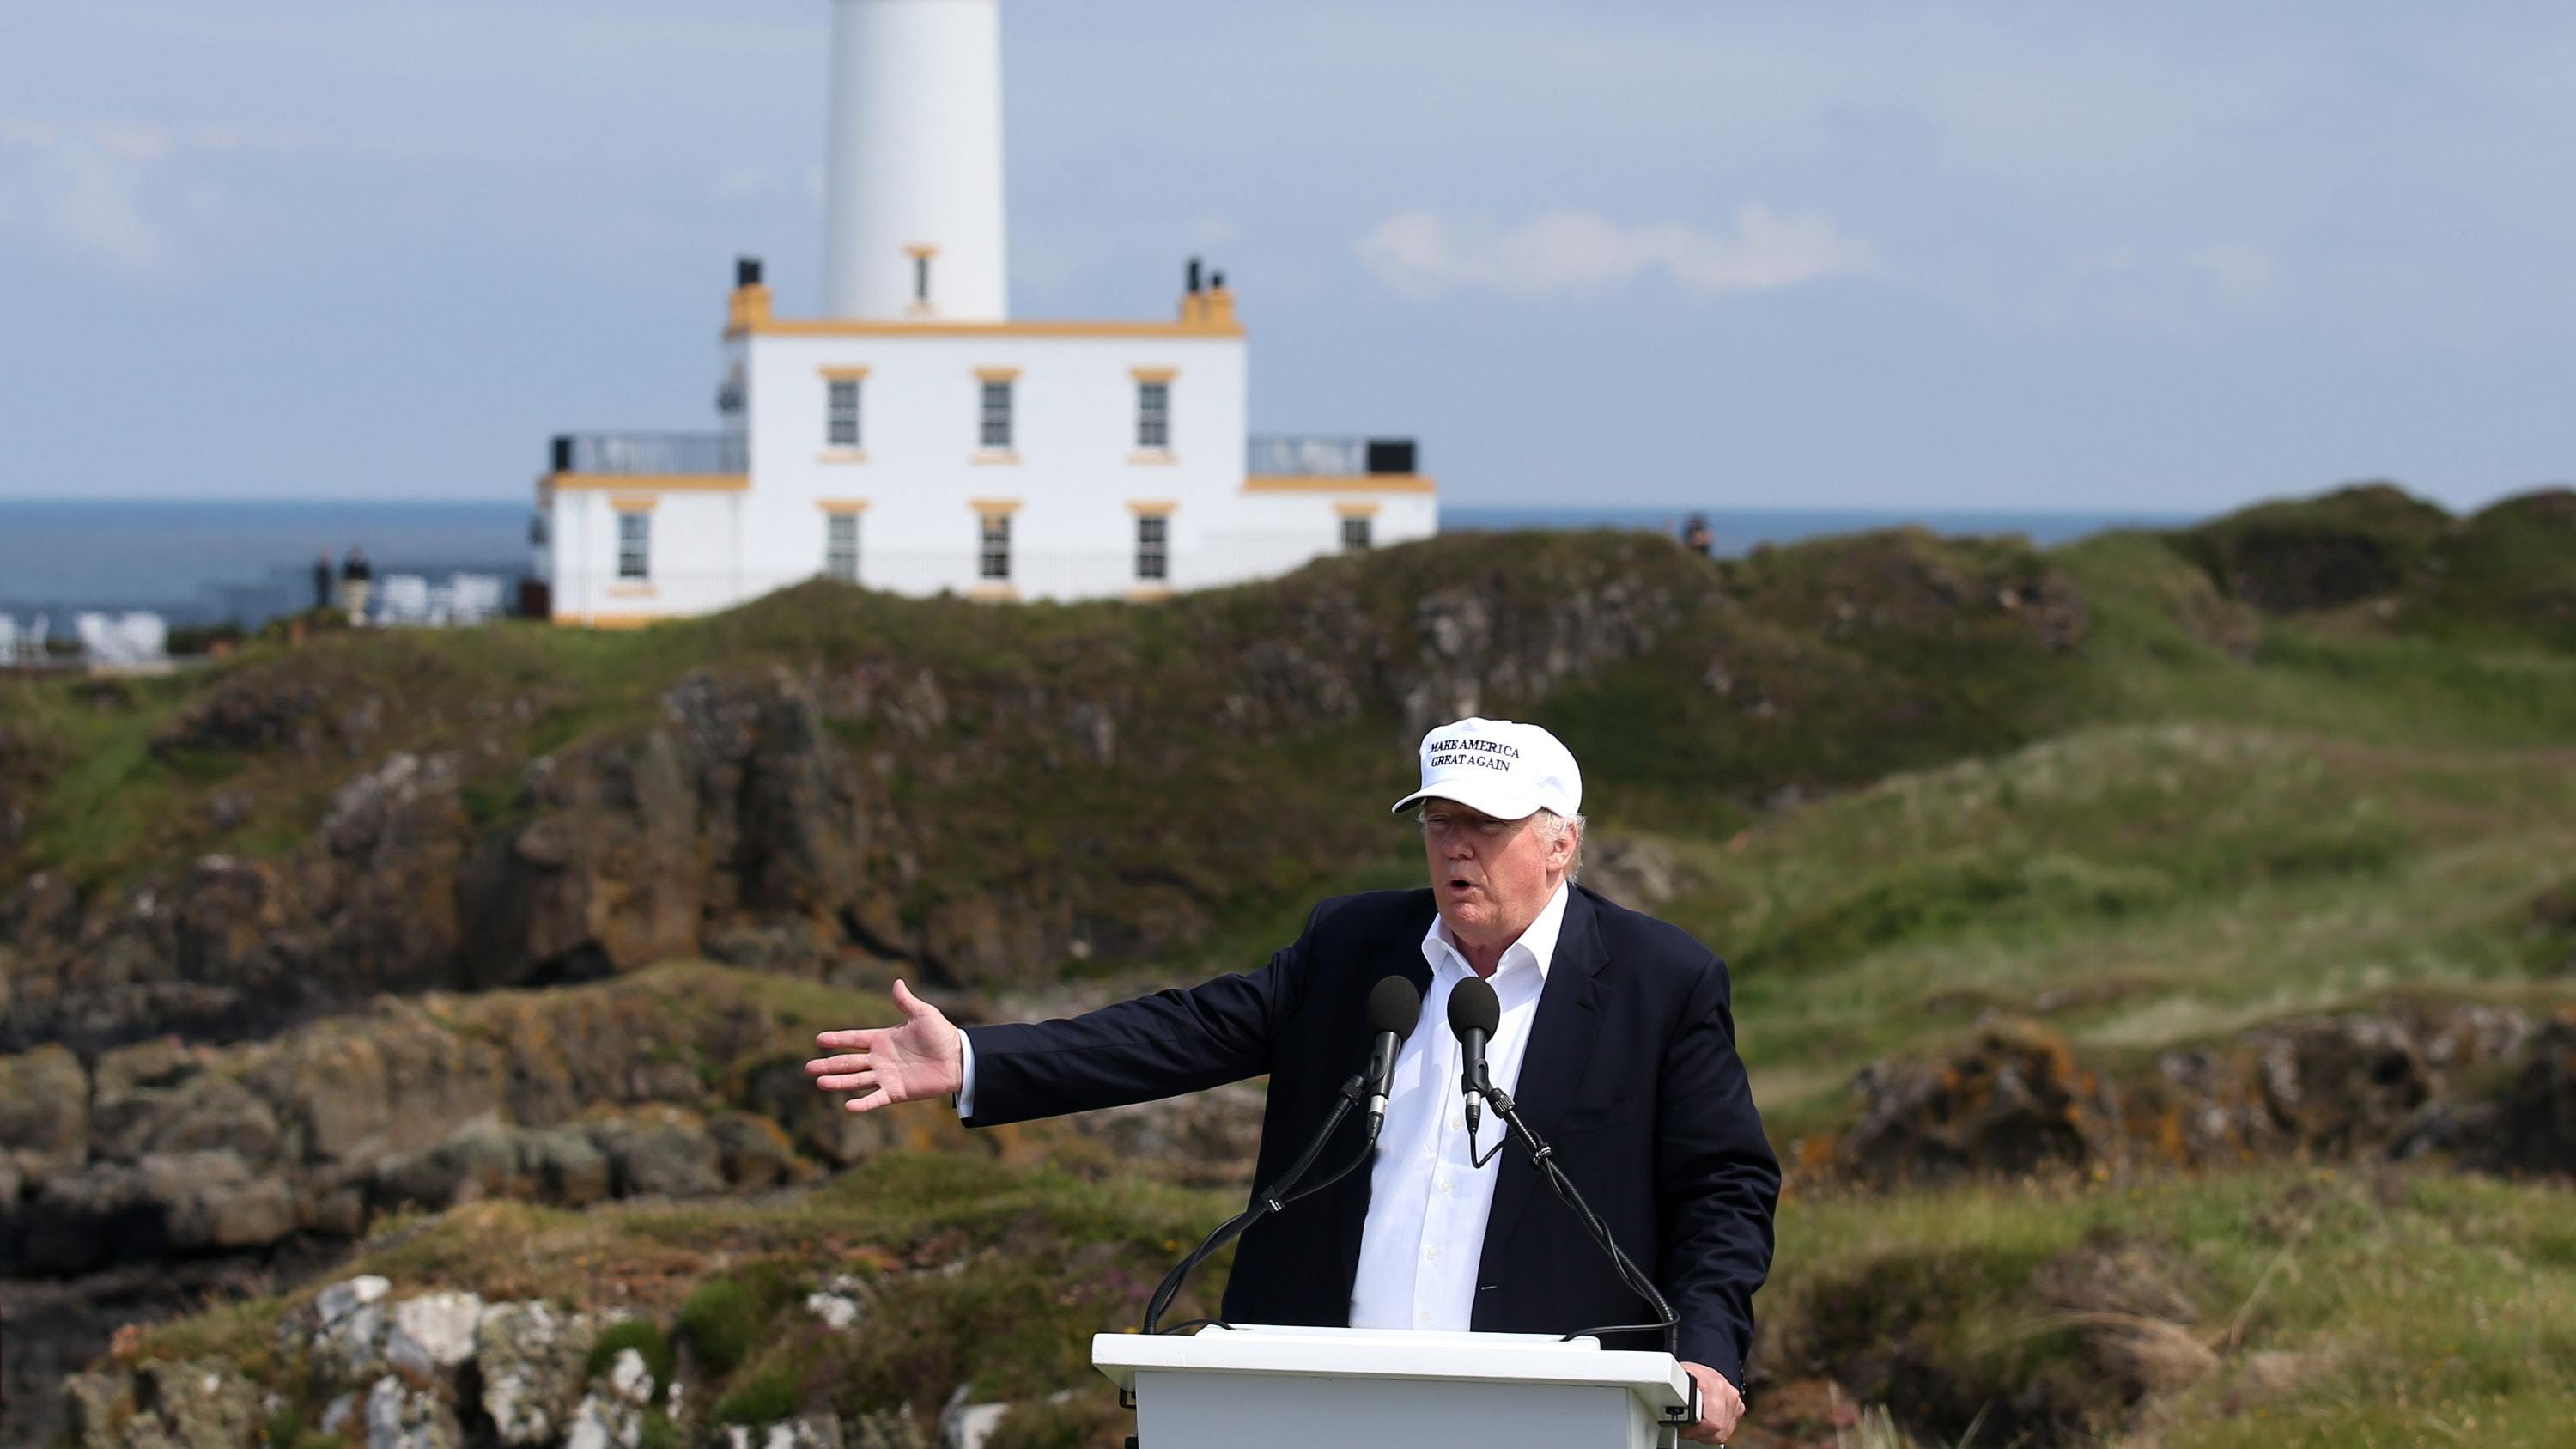 Donald Trump at Trump Turnberry golf course in South Ayrshire (Andrew Milligan/PA)